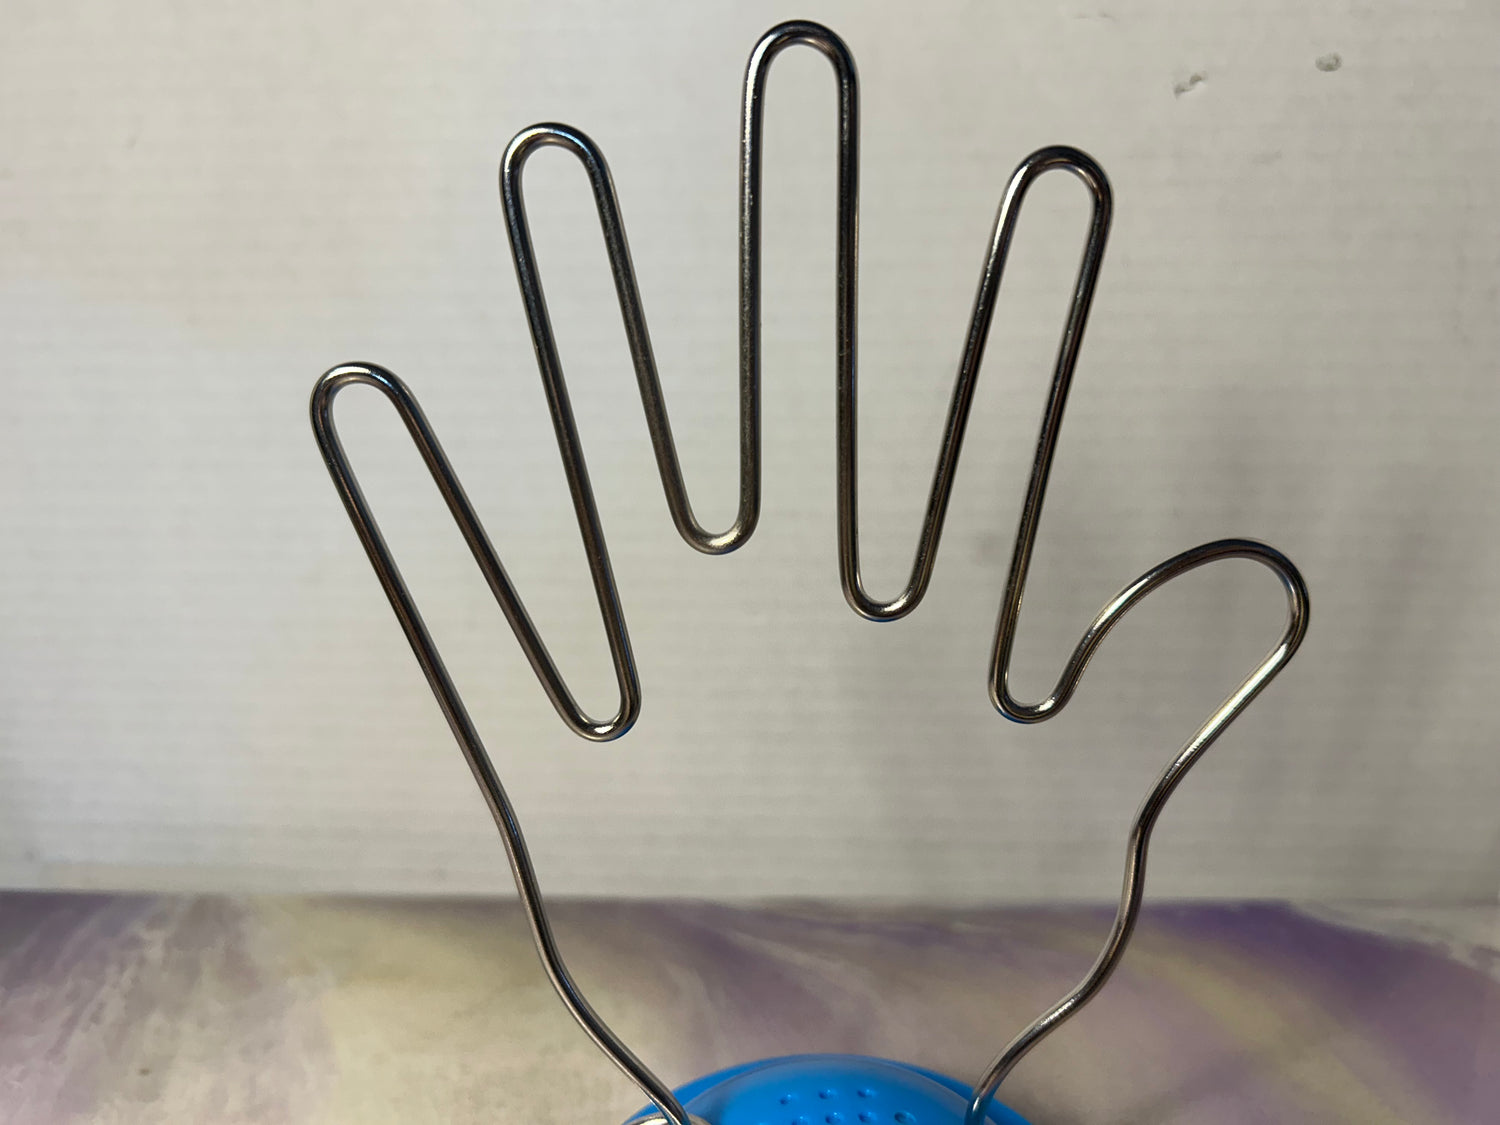 Vintage Styled Carnival Wire Buzzer Game - Hand Shaped Buzzer